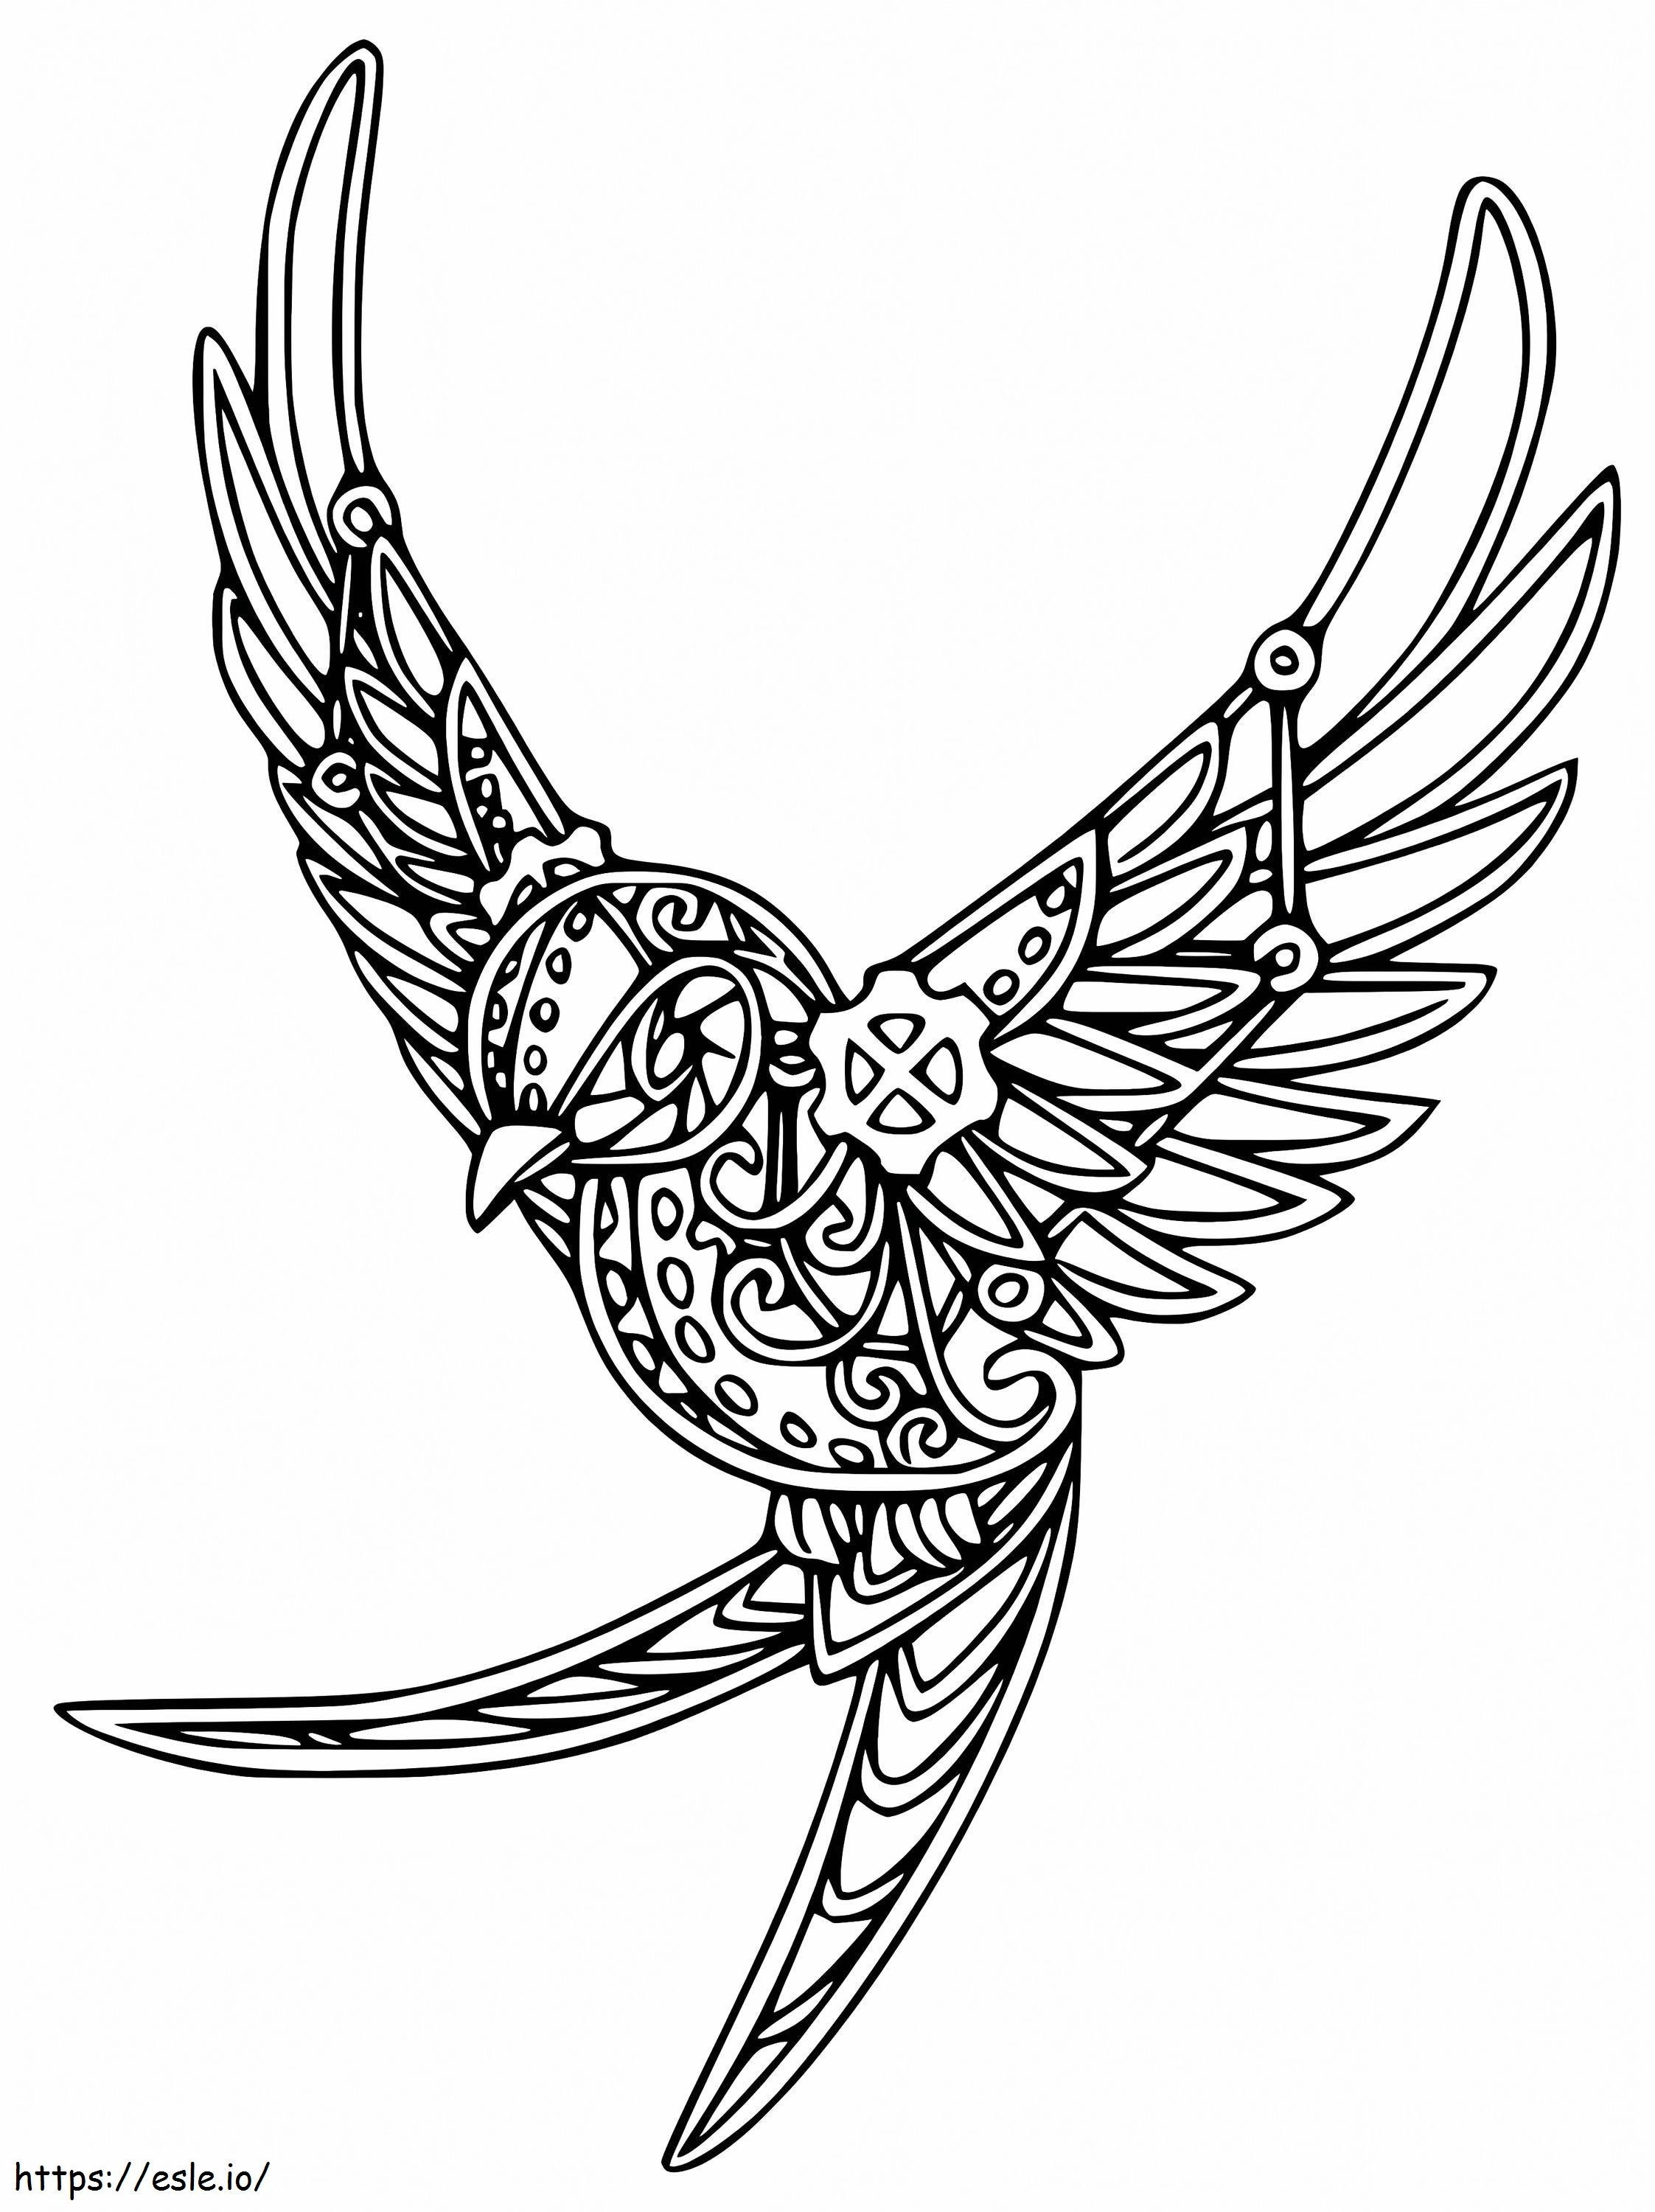 Swallow Zentangle coloring page